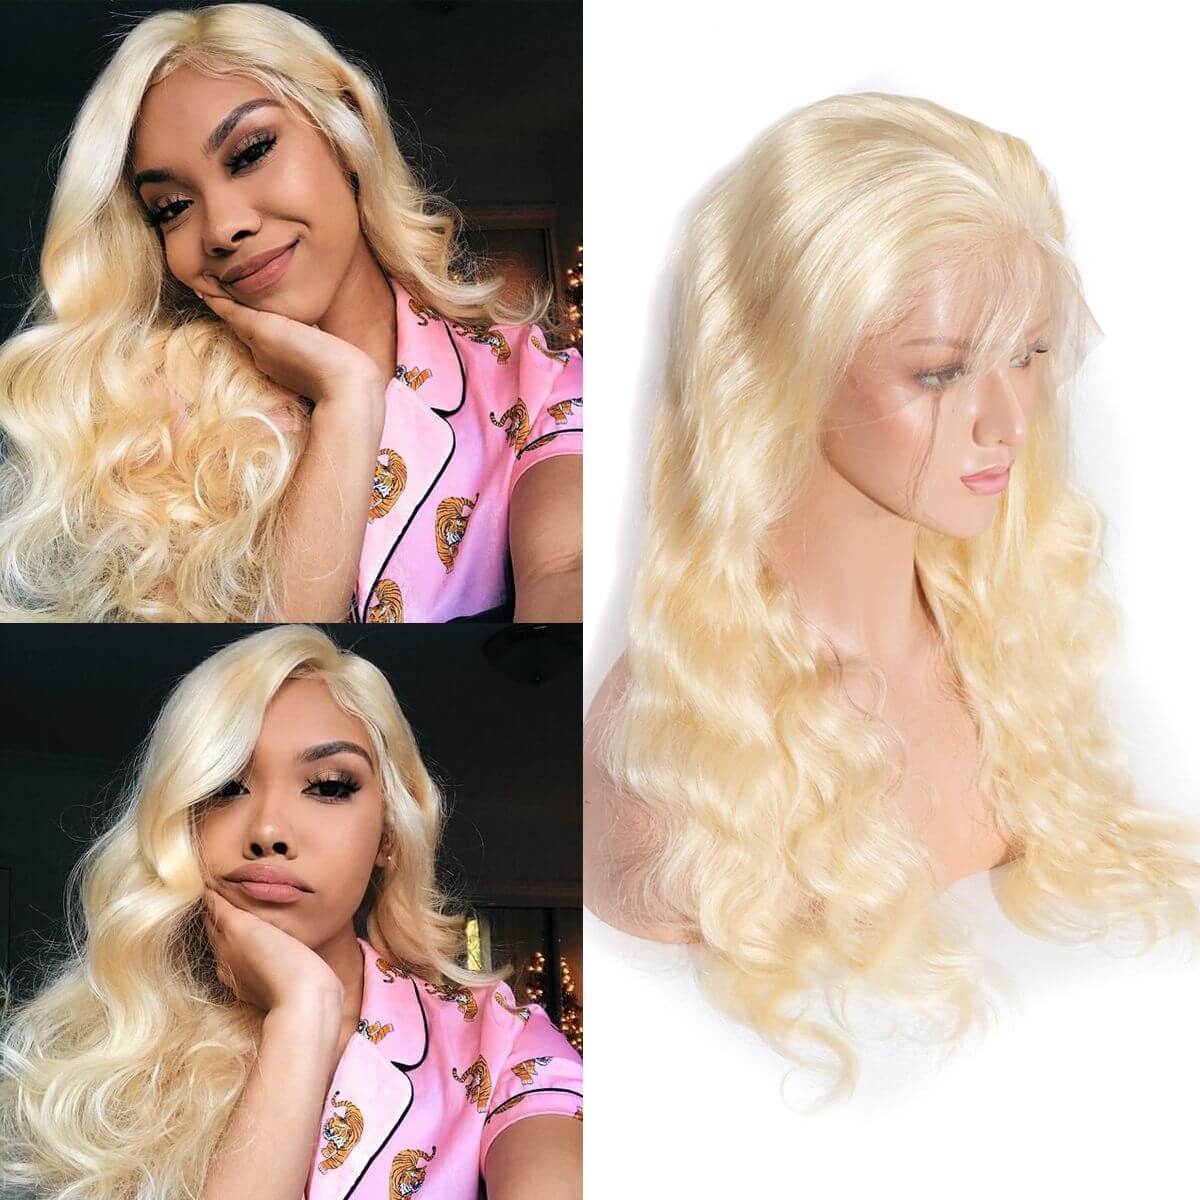 13×6 body wave front wig,13×6 body wave lace frontal wigs,13×6 blonde body wave lace frontal wigs,613 blonde body wave front wig,cheap 13×6 blonde body wave front wig